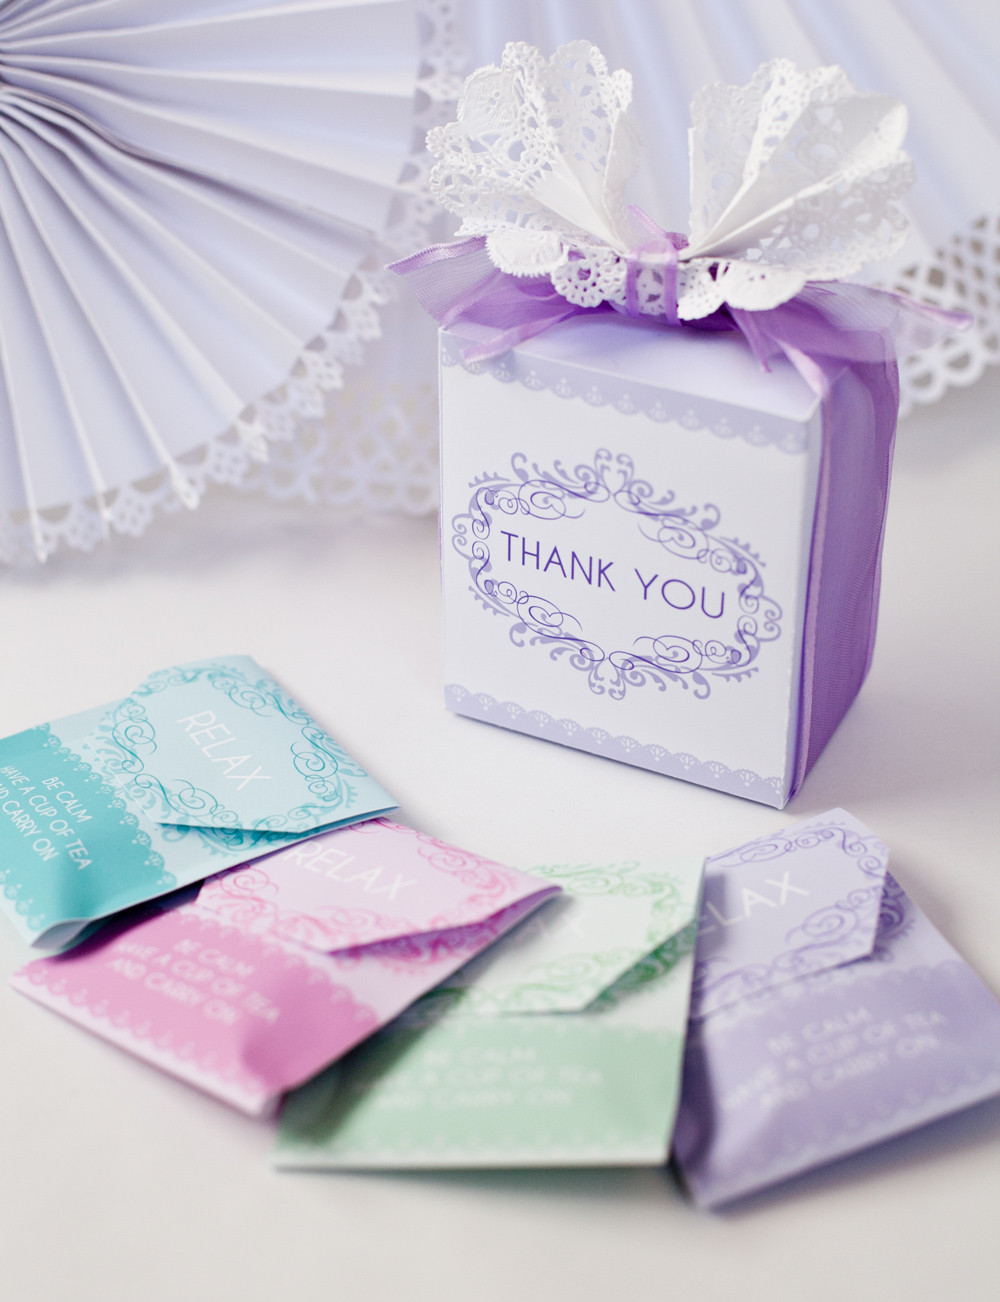 DIY Party Favors For Baby Shower
 DIY Baby Shower Tea Party Favor Free Printable